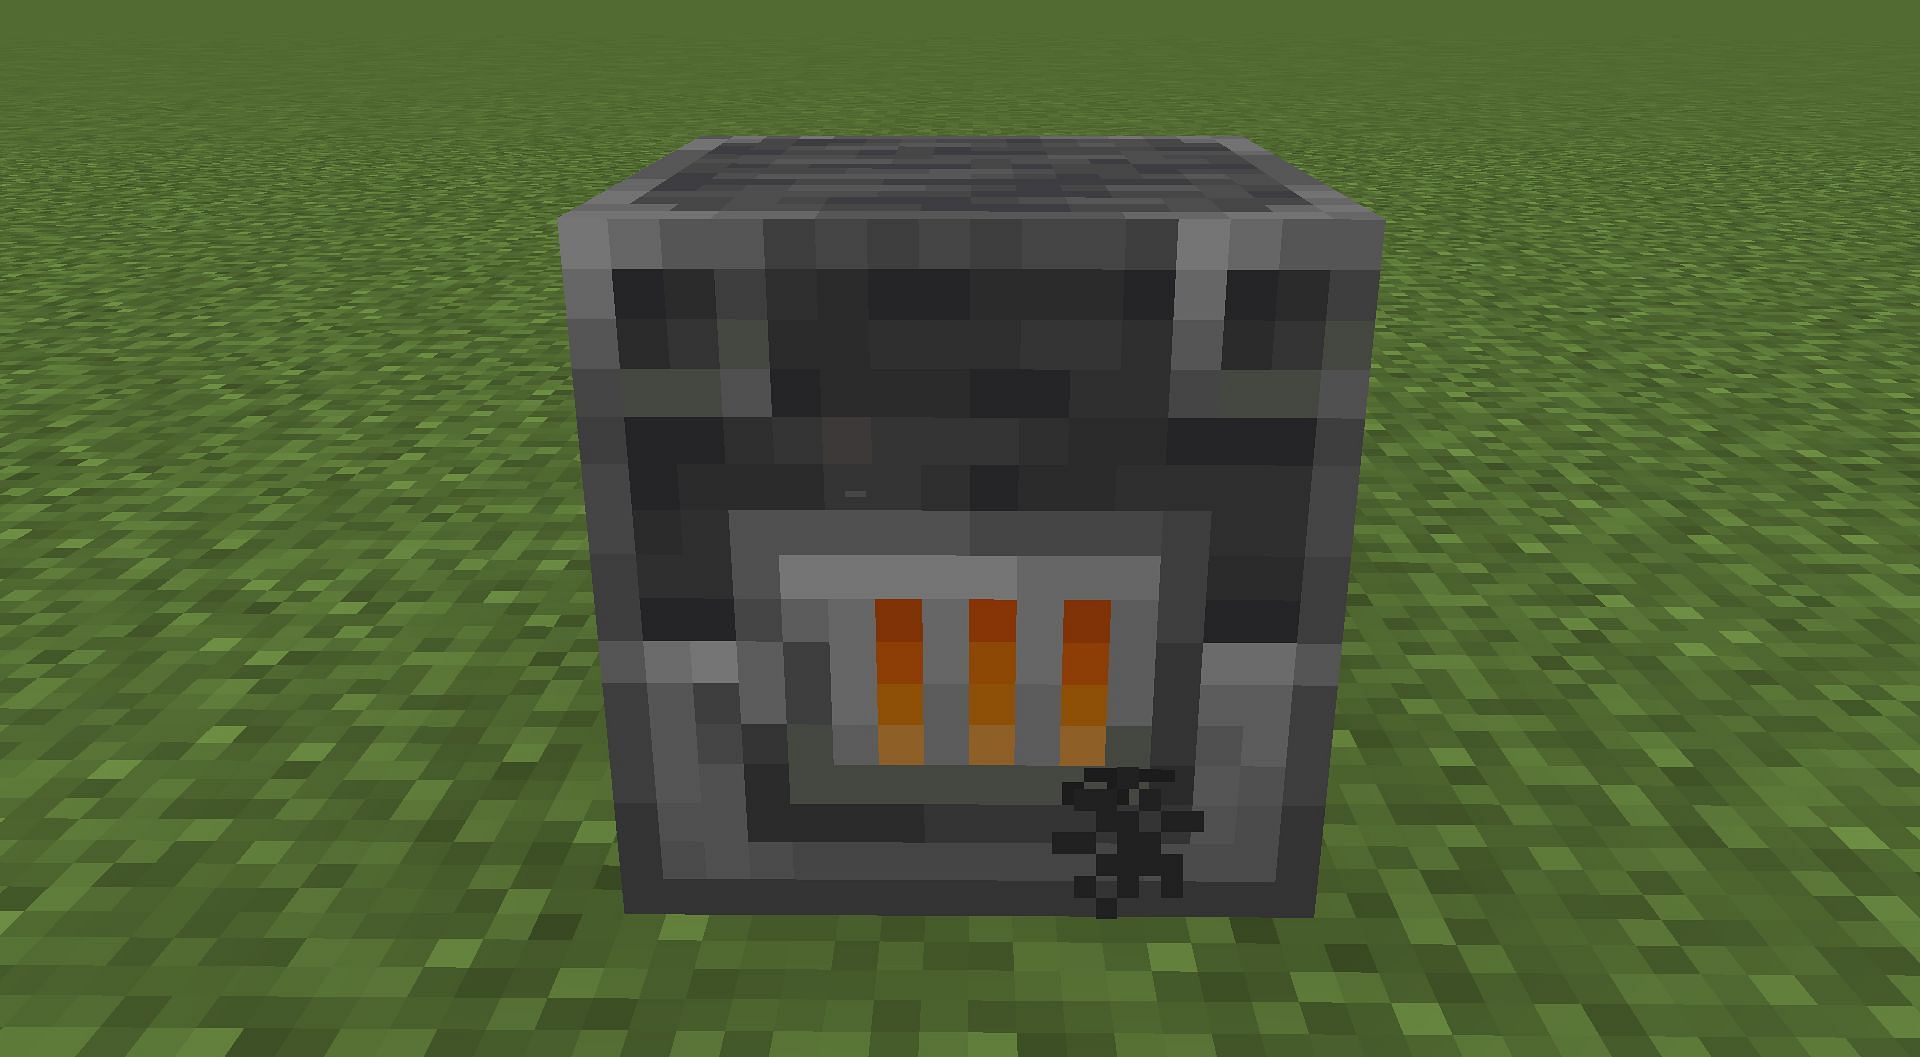 Particularly used to smelt ores, raw materials etc. (Image via Minecraft)